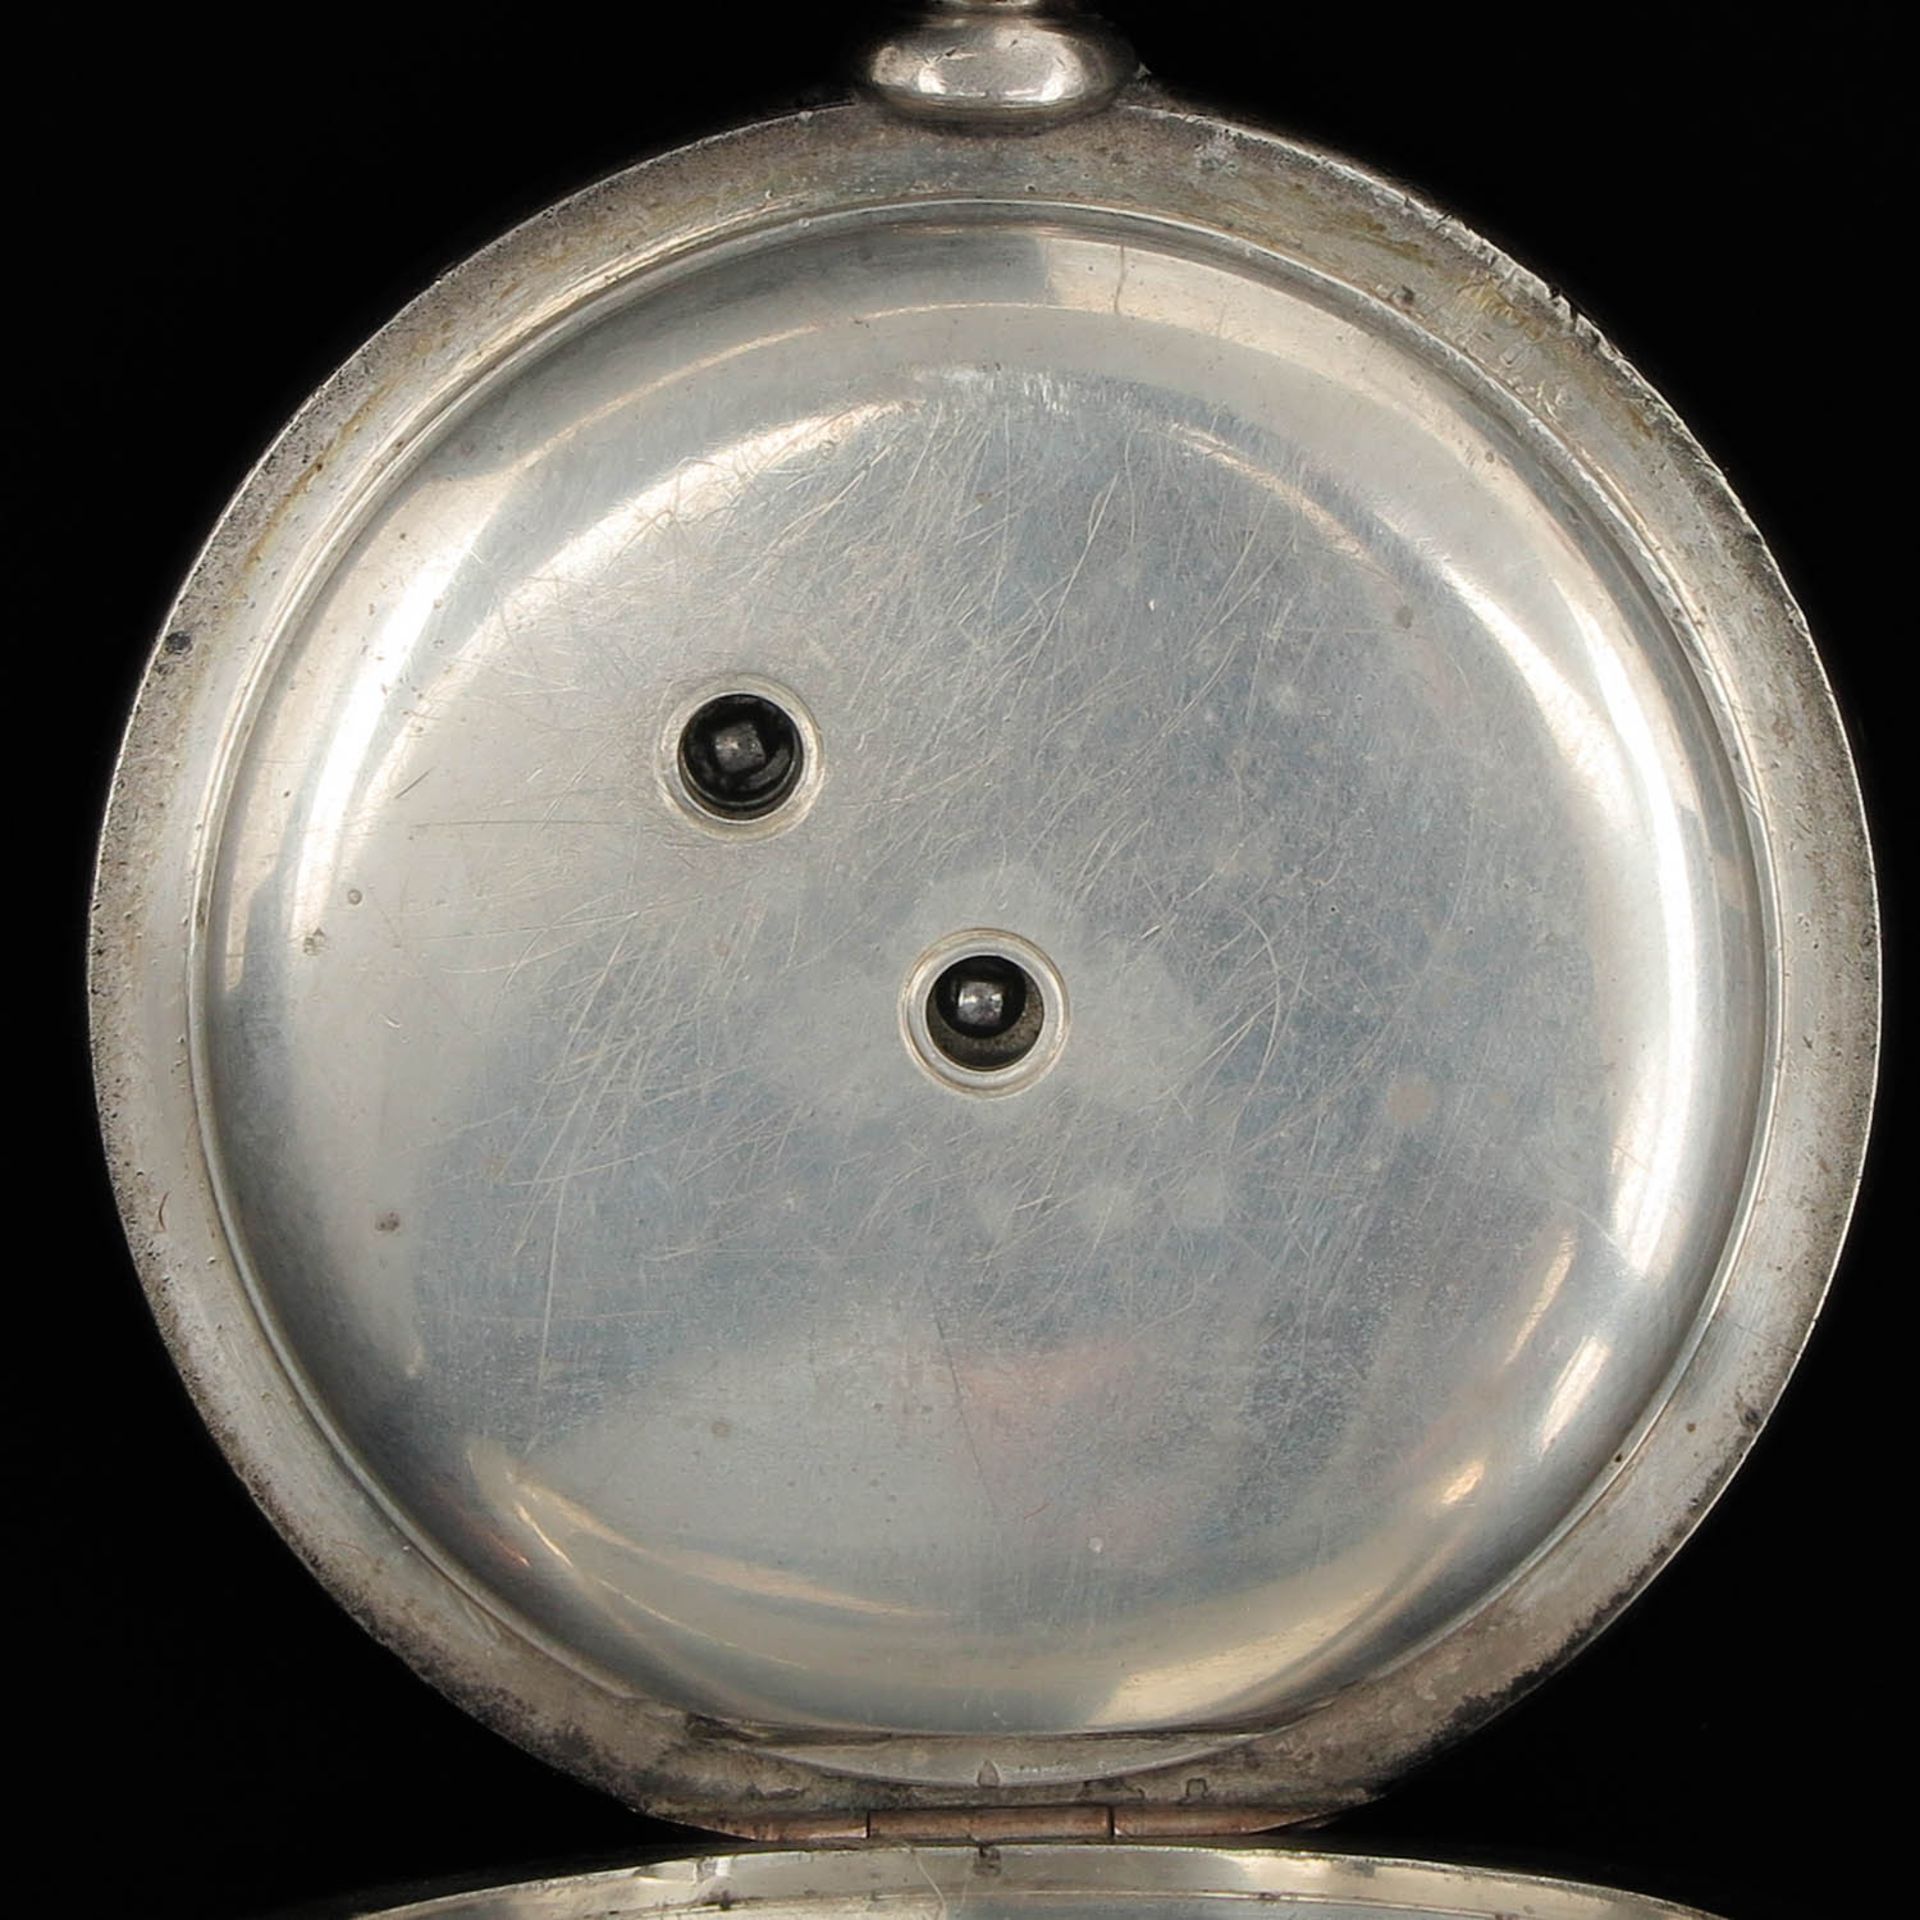 A James Nardin Locle Pocket Watch - Image 4 of 7